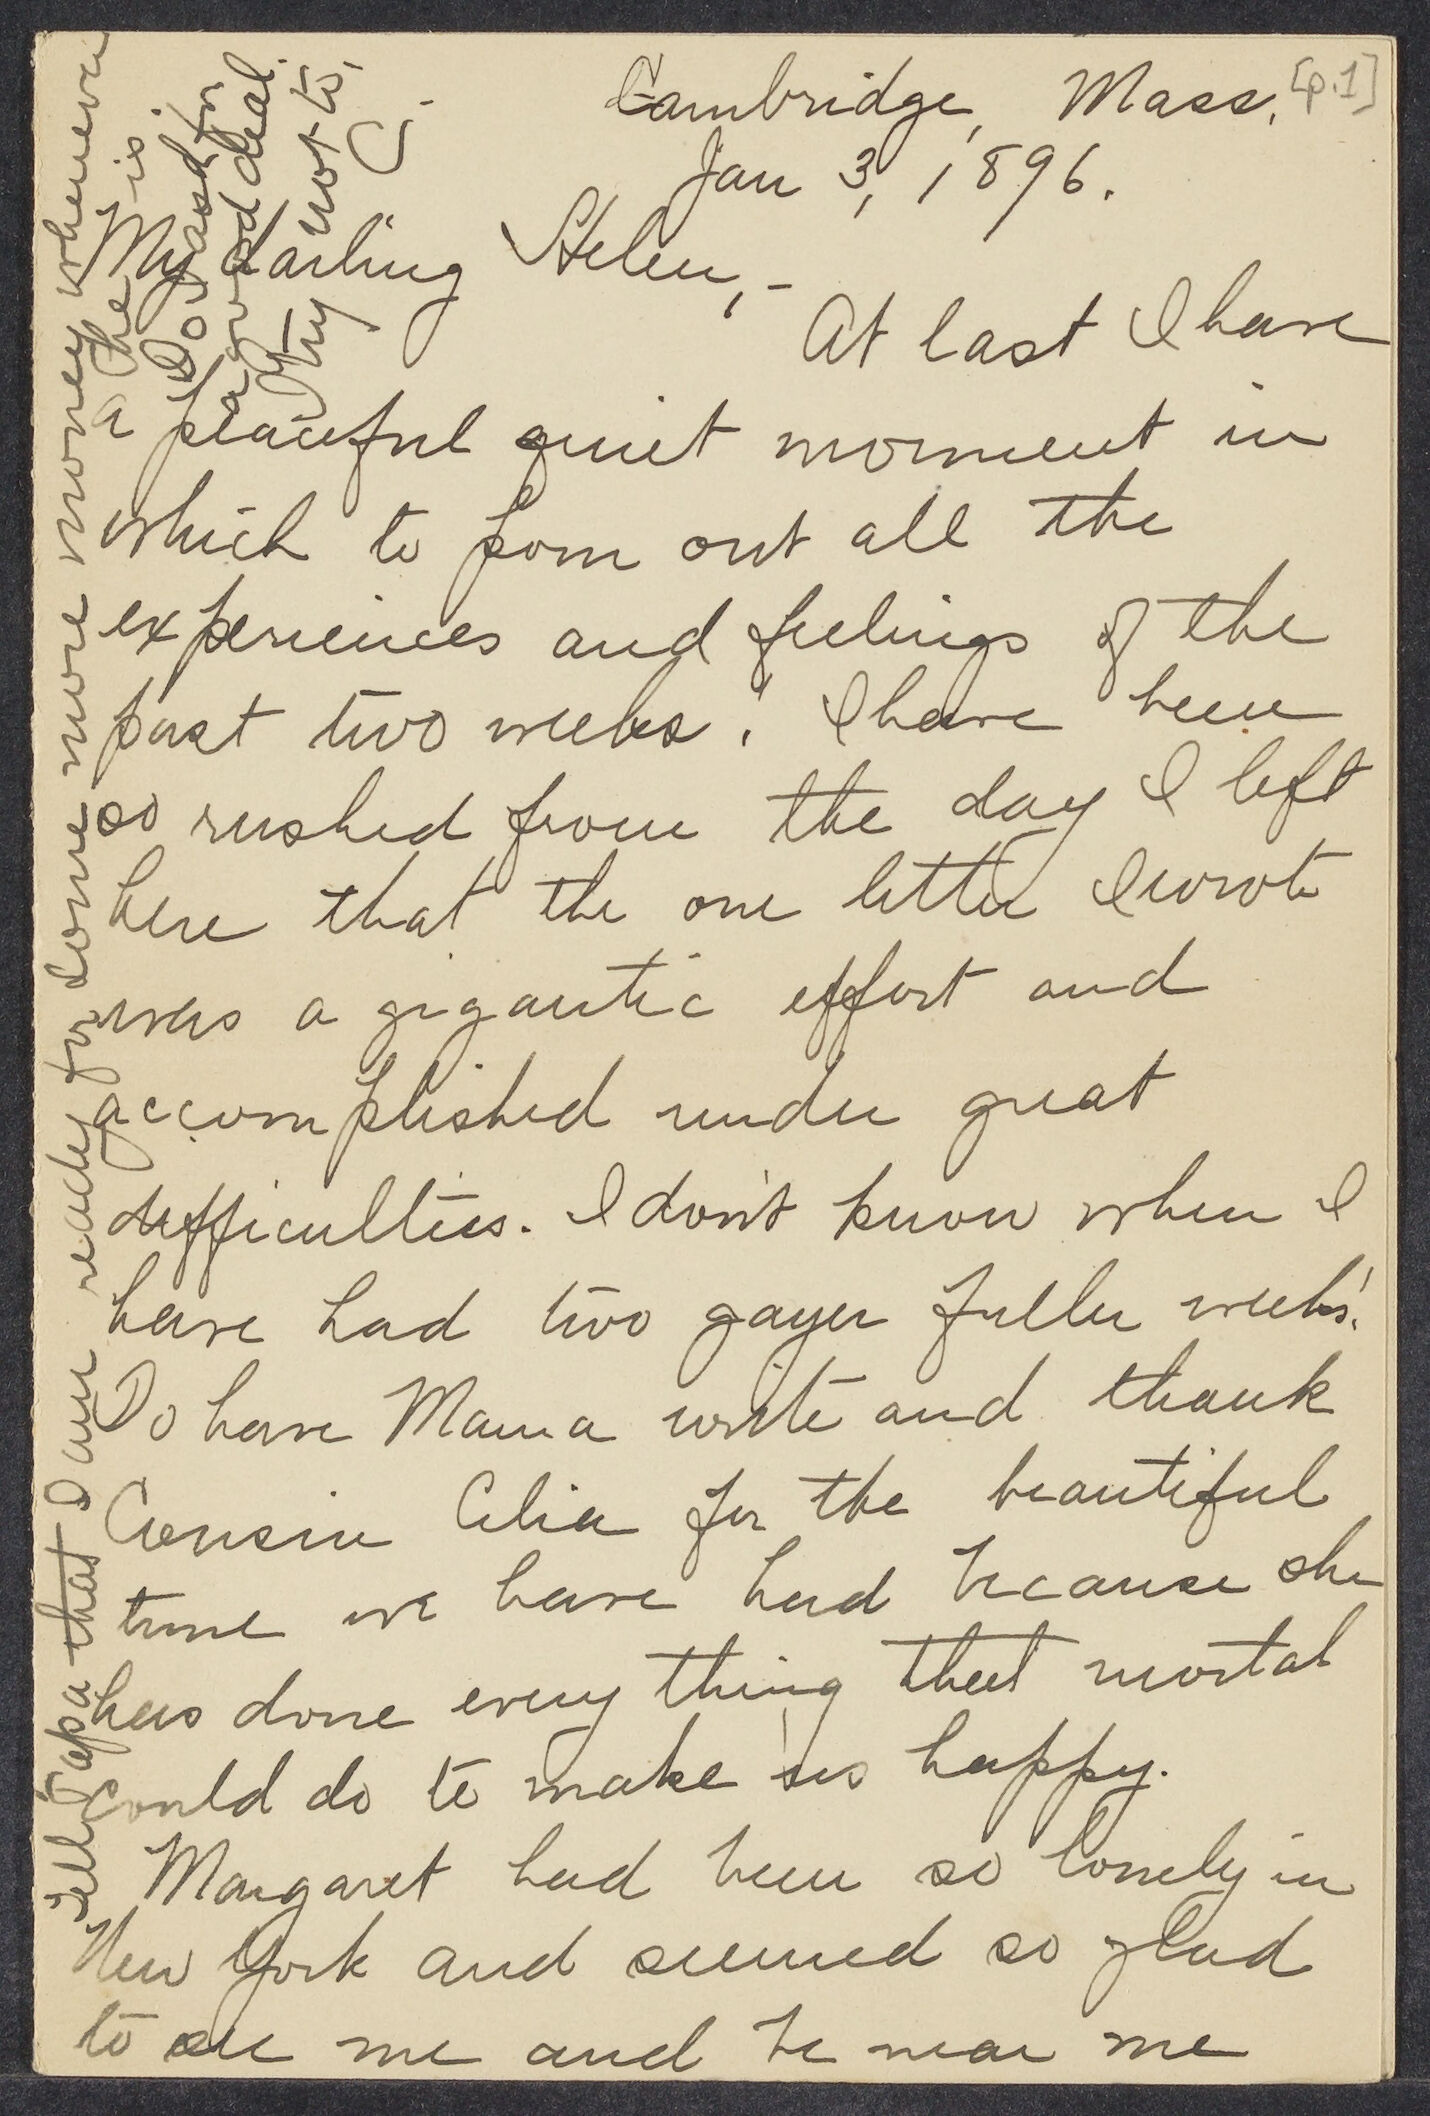 Letters from Cornelia James Cannon to her aunt, parents and siblings, January 1896-February 1897